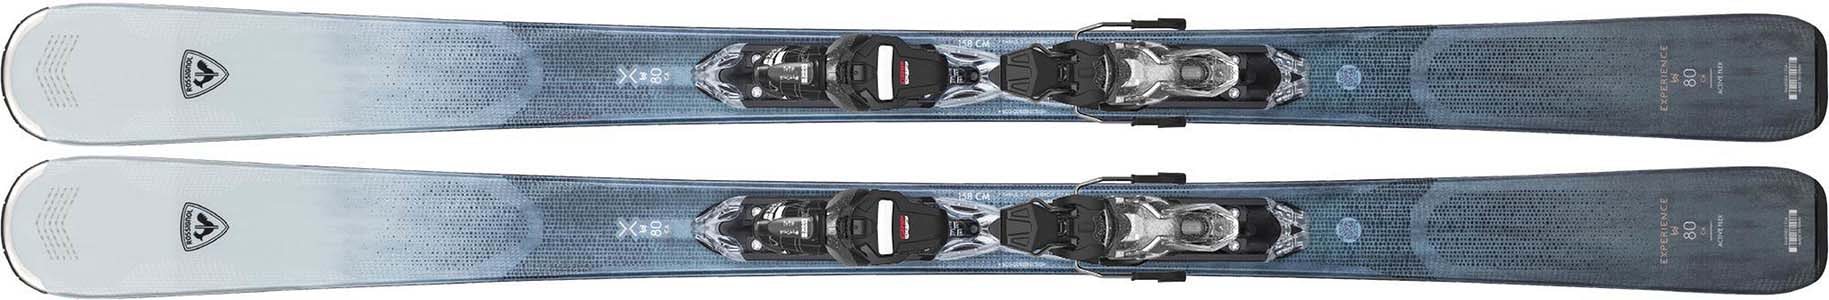 Rossignol experience W 80 Carbon